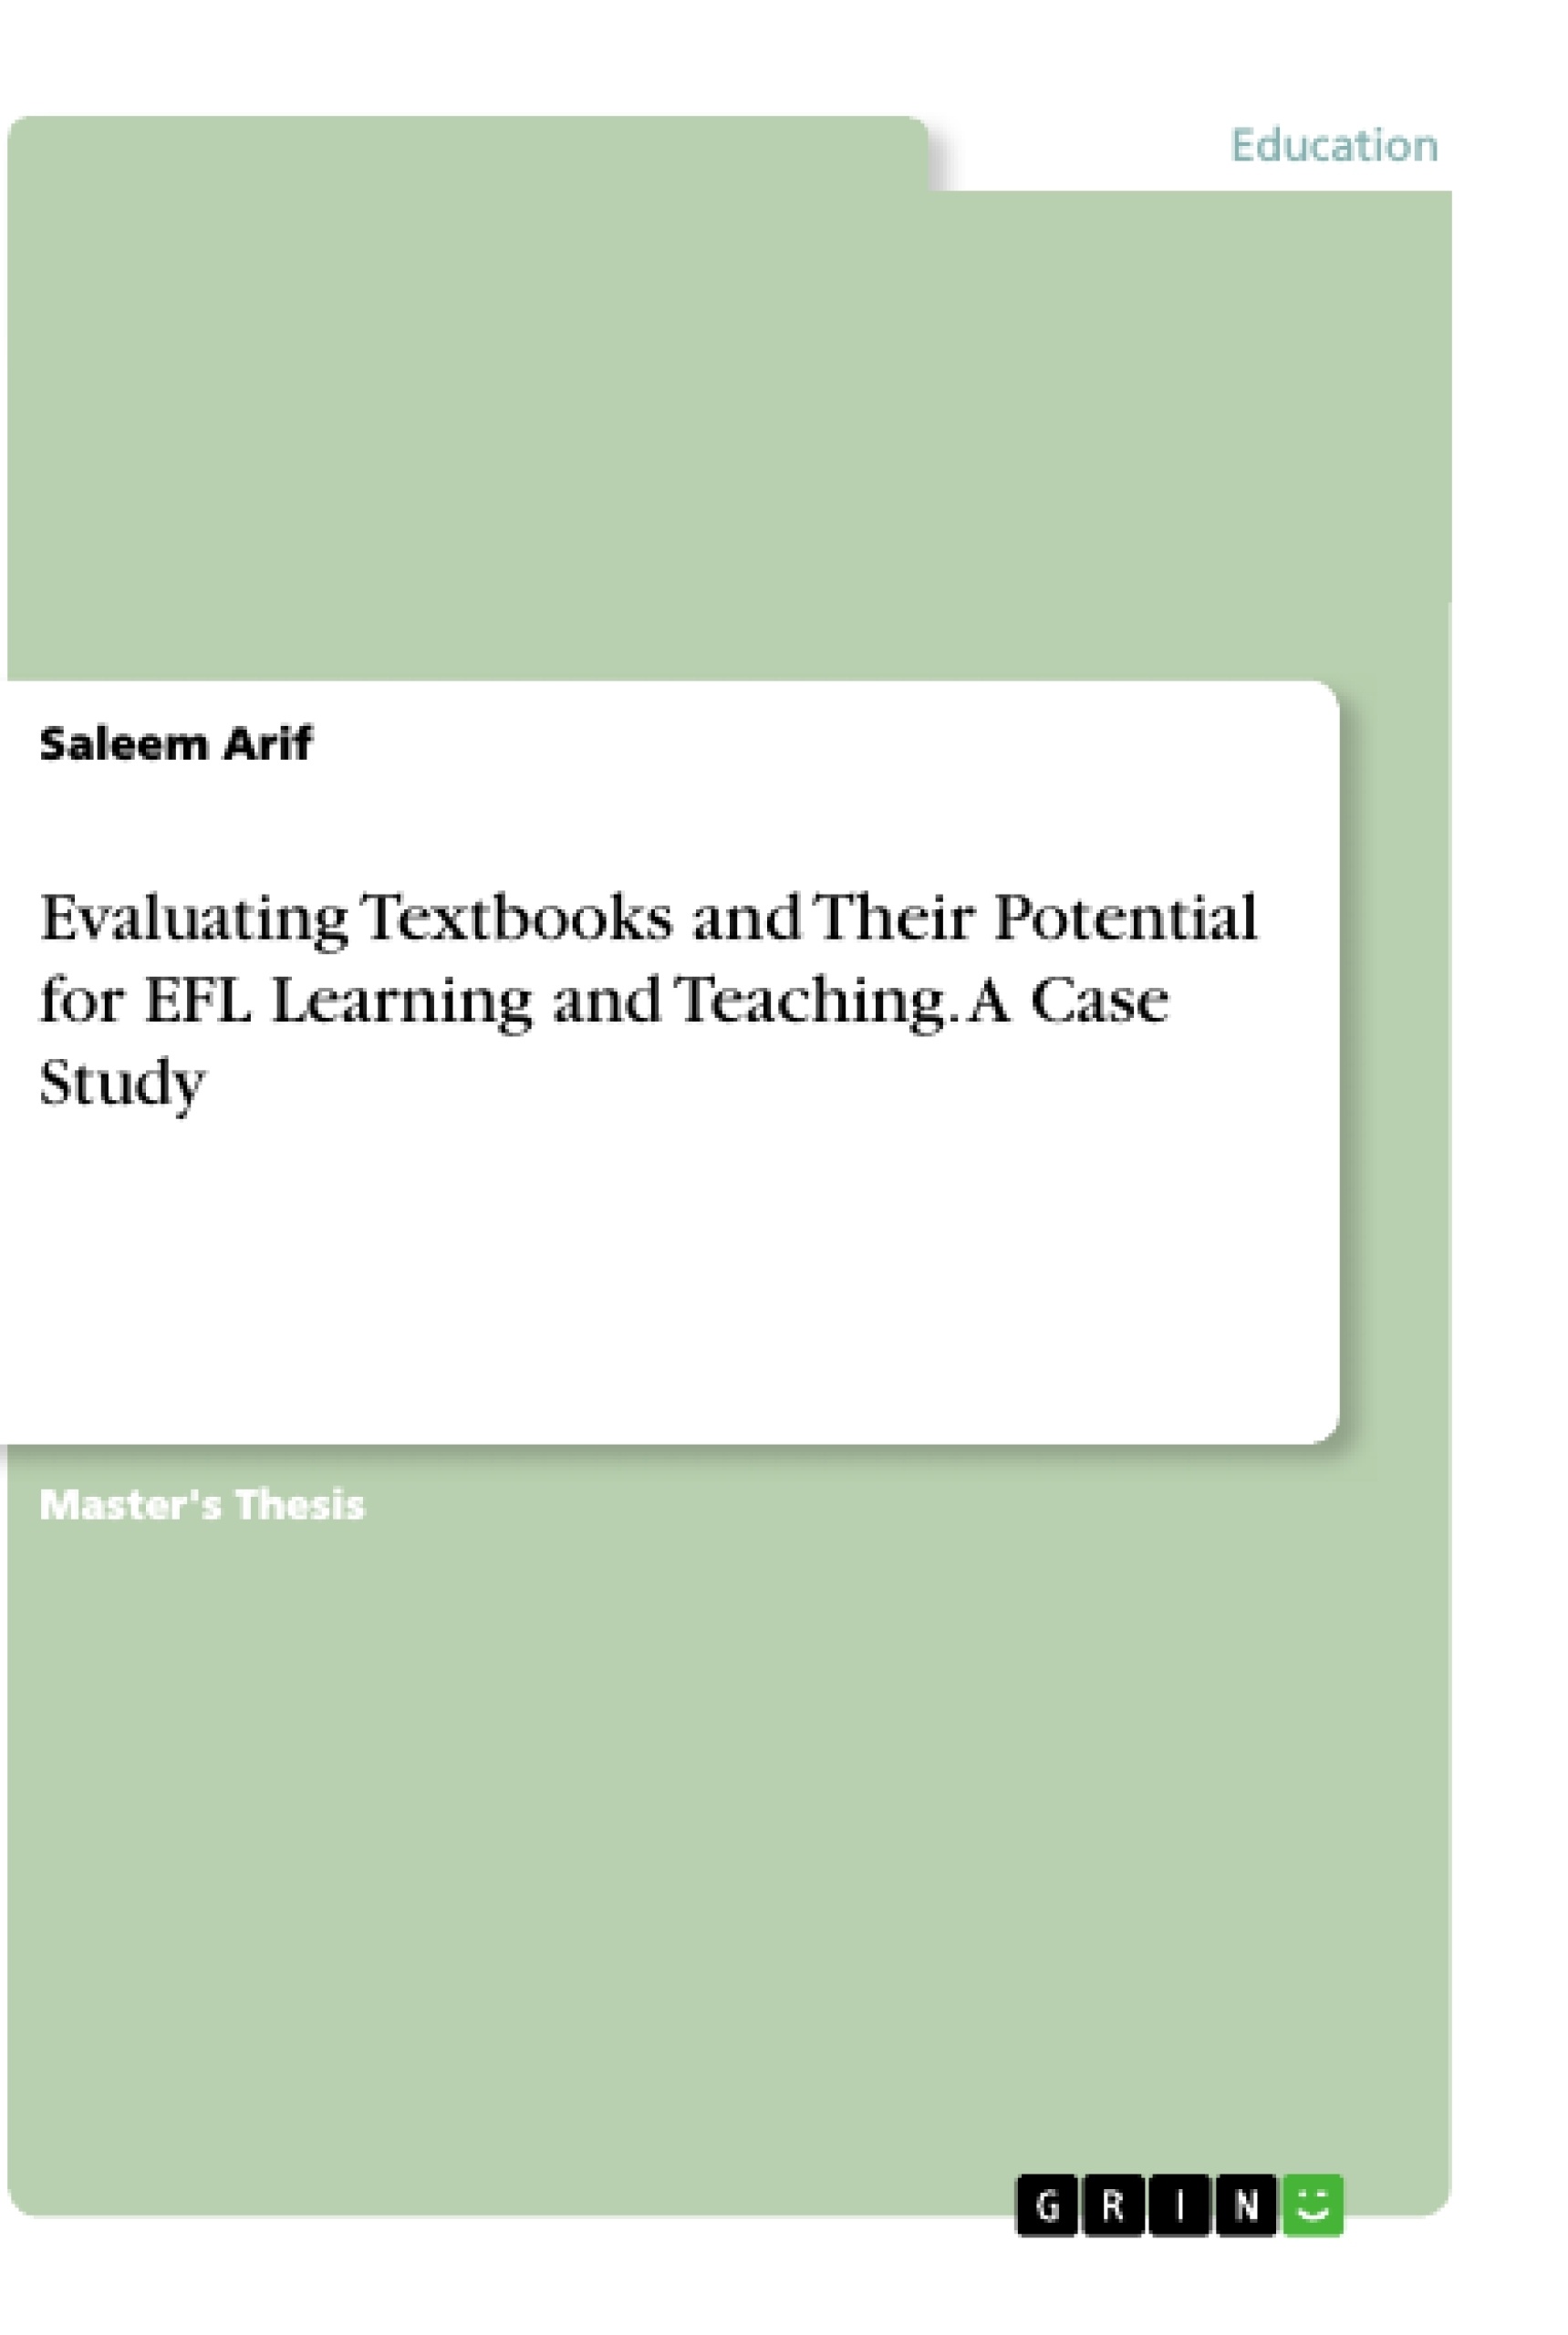 Title: Evaluating Textbooks and Their Potential for EFL Learning and Teaching. A Case Study